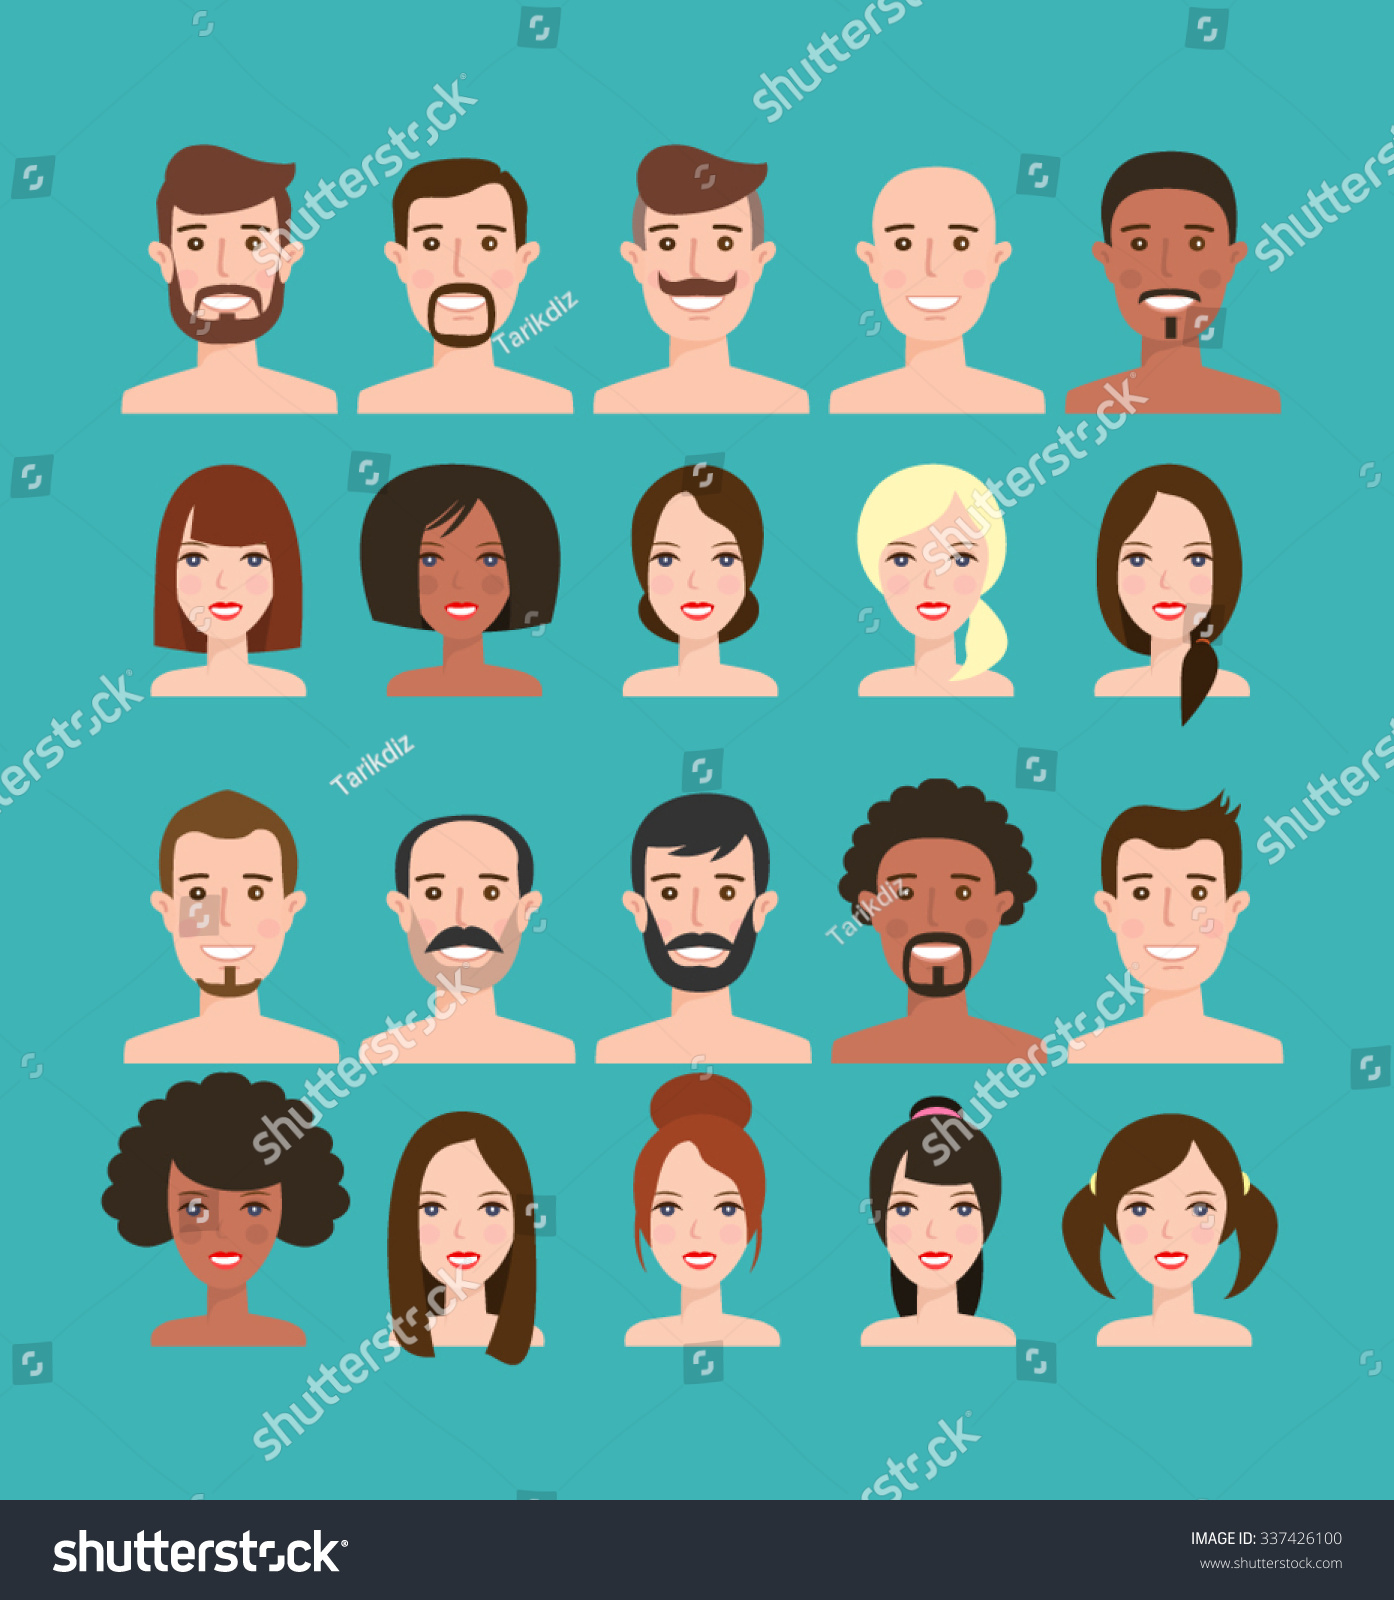 SVG of man and woman faces big set.people faces different hair style svg